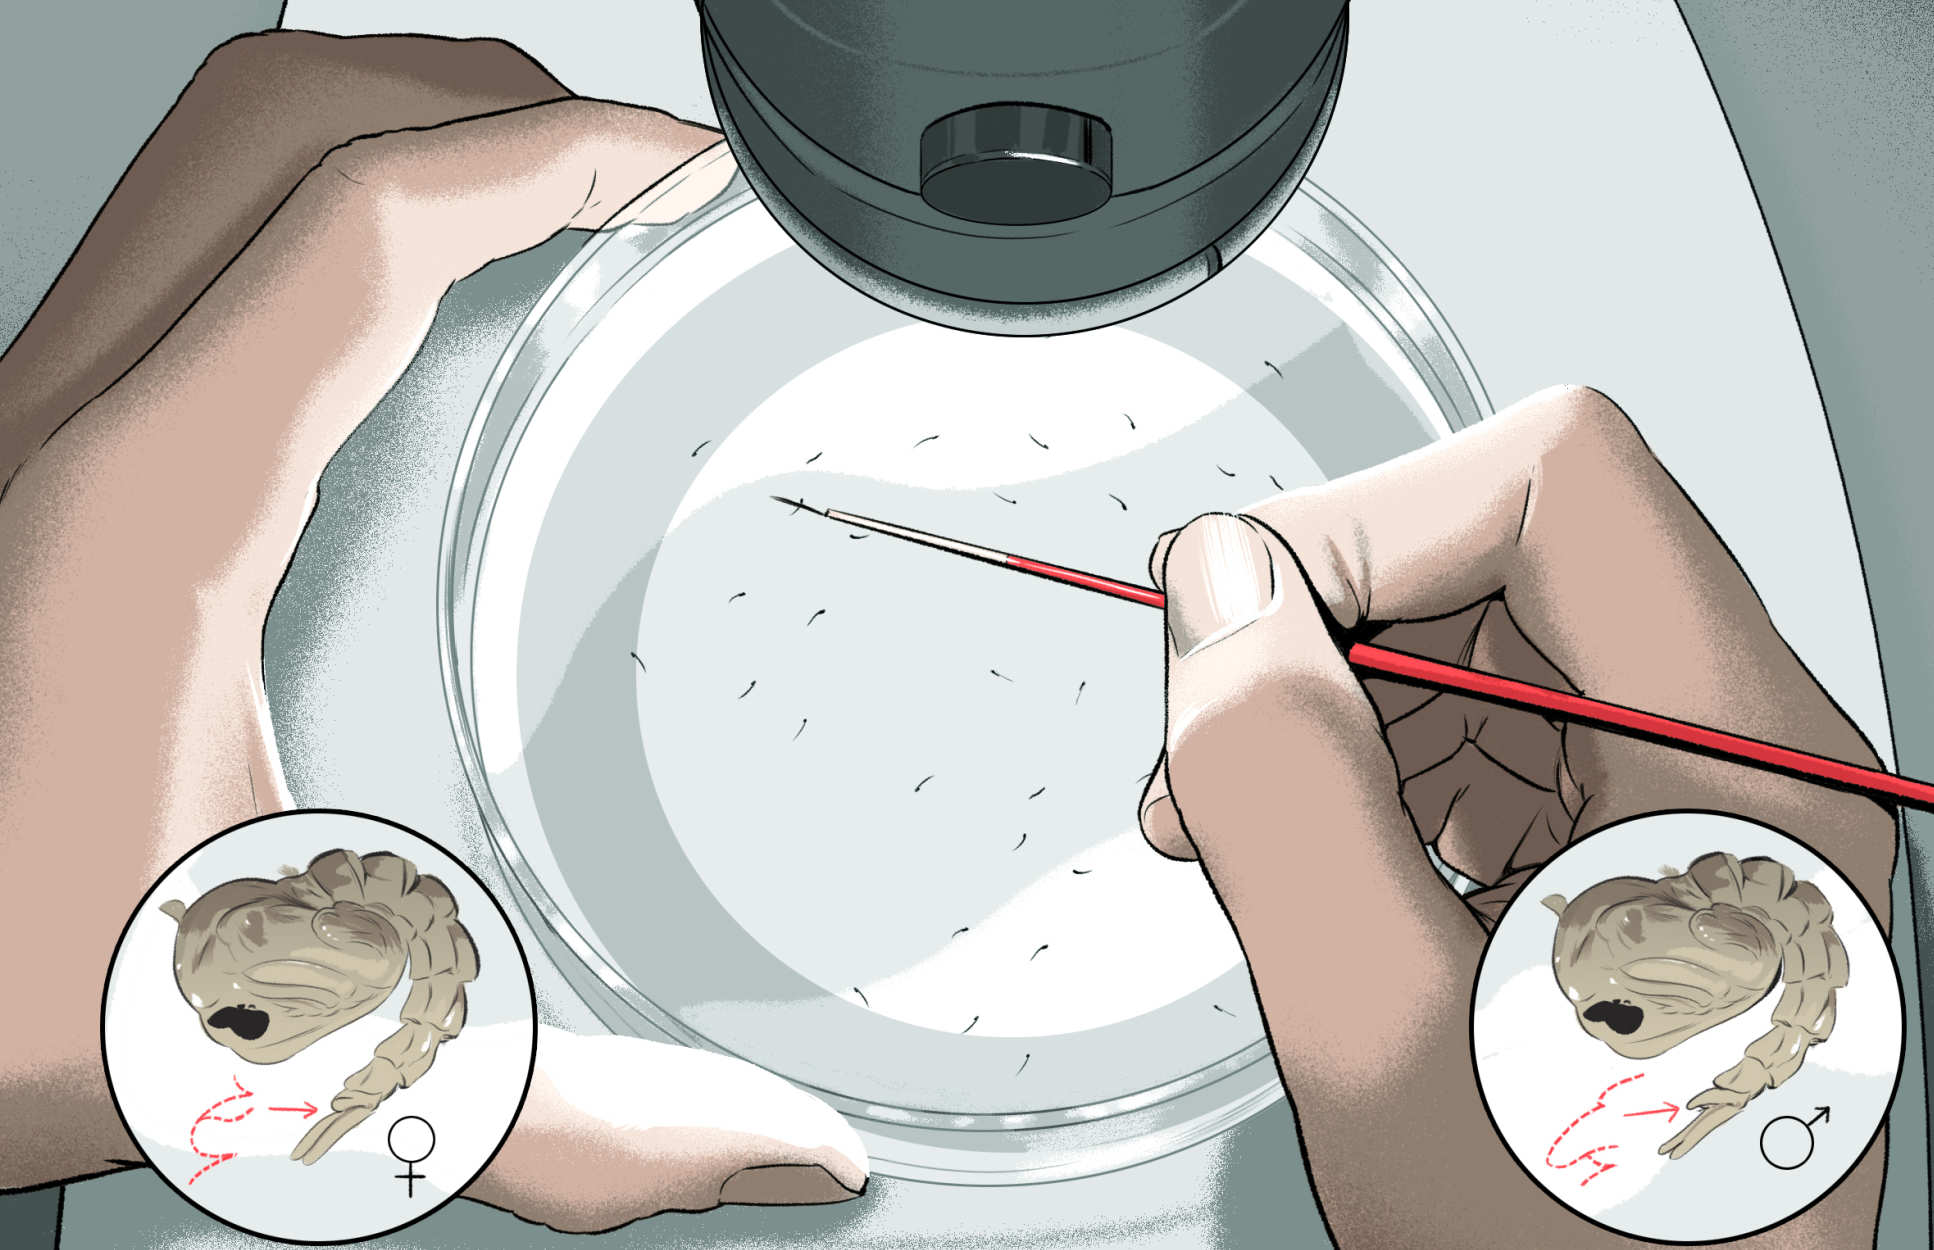 An illustration showing a scientist separating mosquito pupae into males and females under a microscope